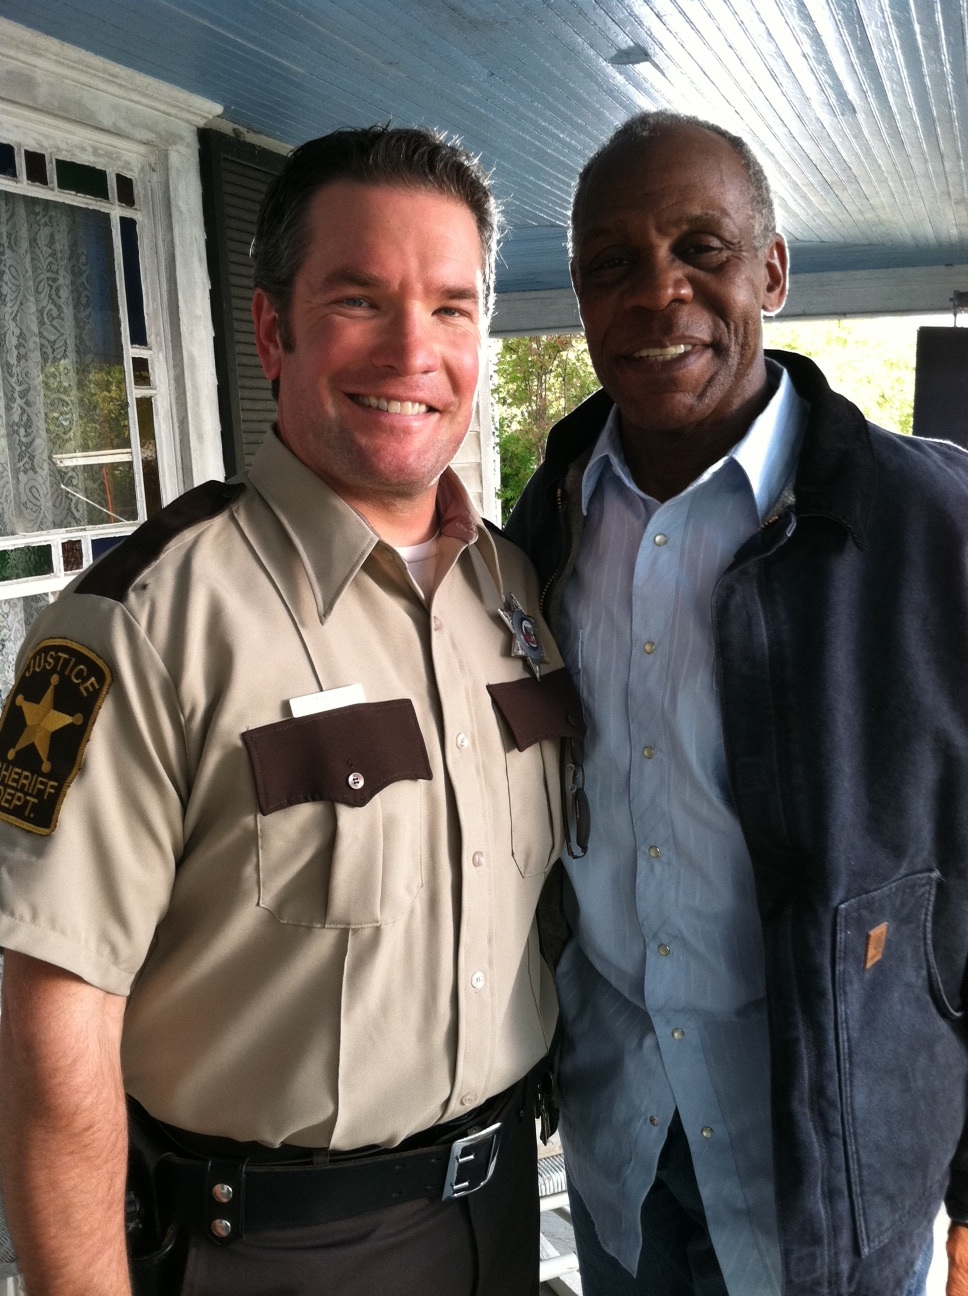 As The Sheriff on the set of CHASING SHAKESPEARE with Danny Glover